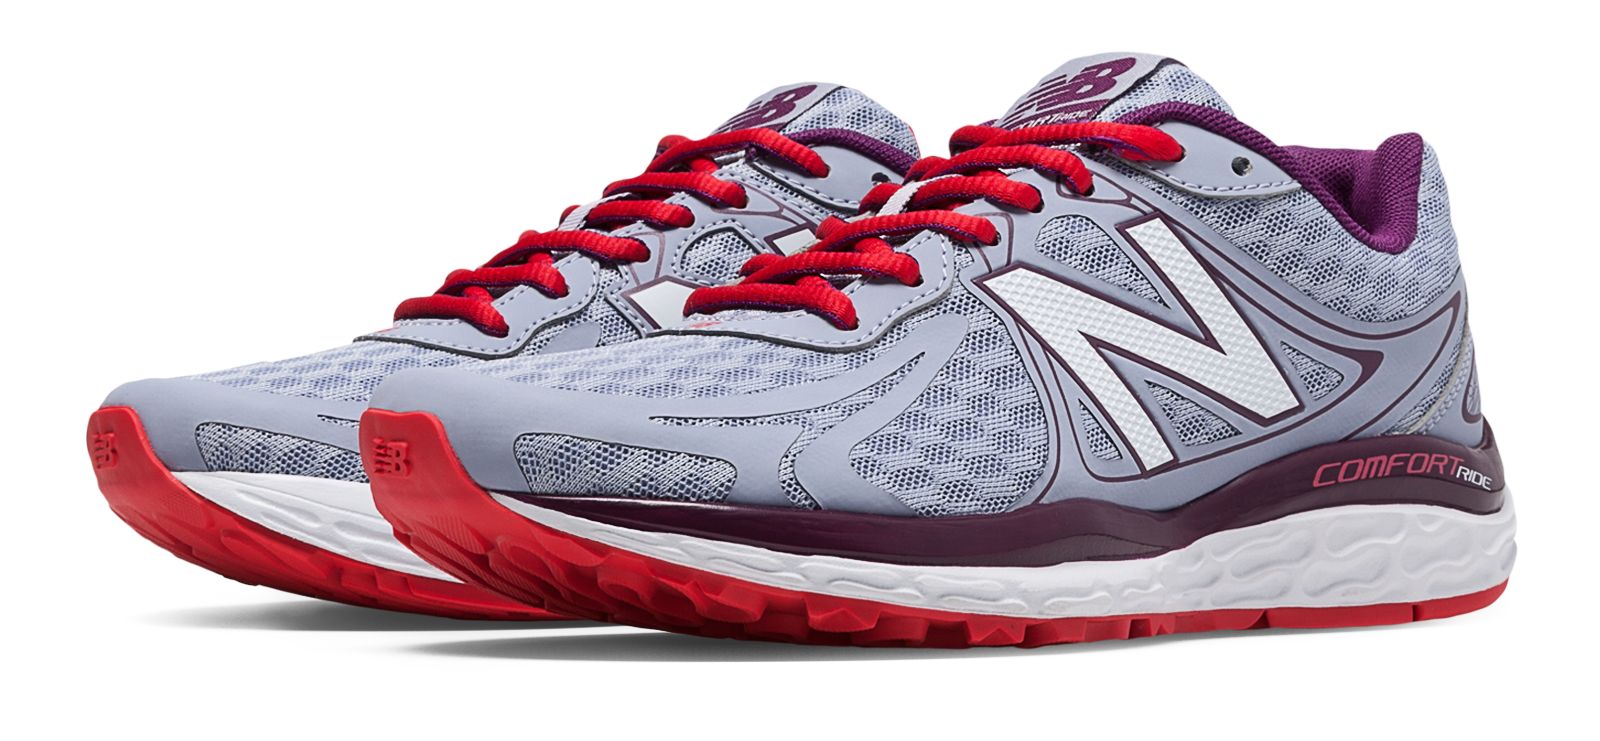 New Balance W720-V3 on Sale - Discounts Up to 56% Off on W720LP3 at Joe's New  Balance Outlet